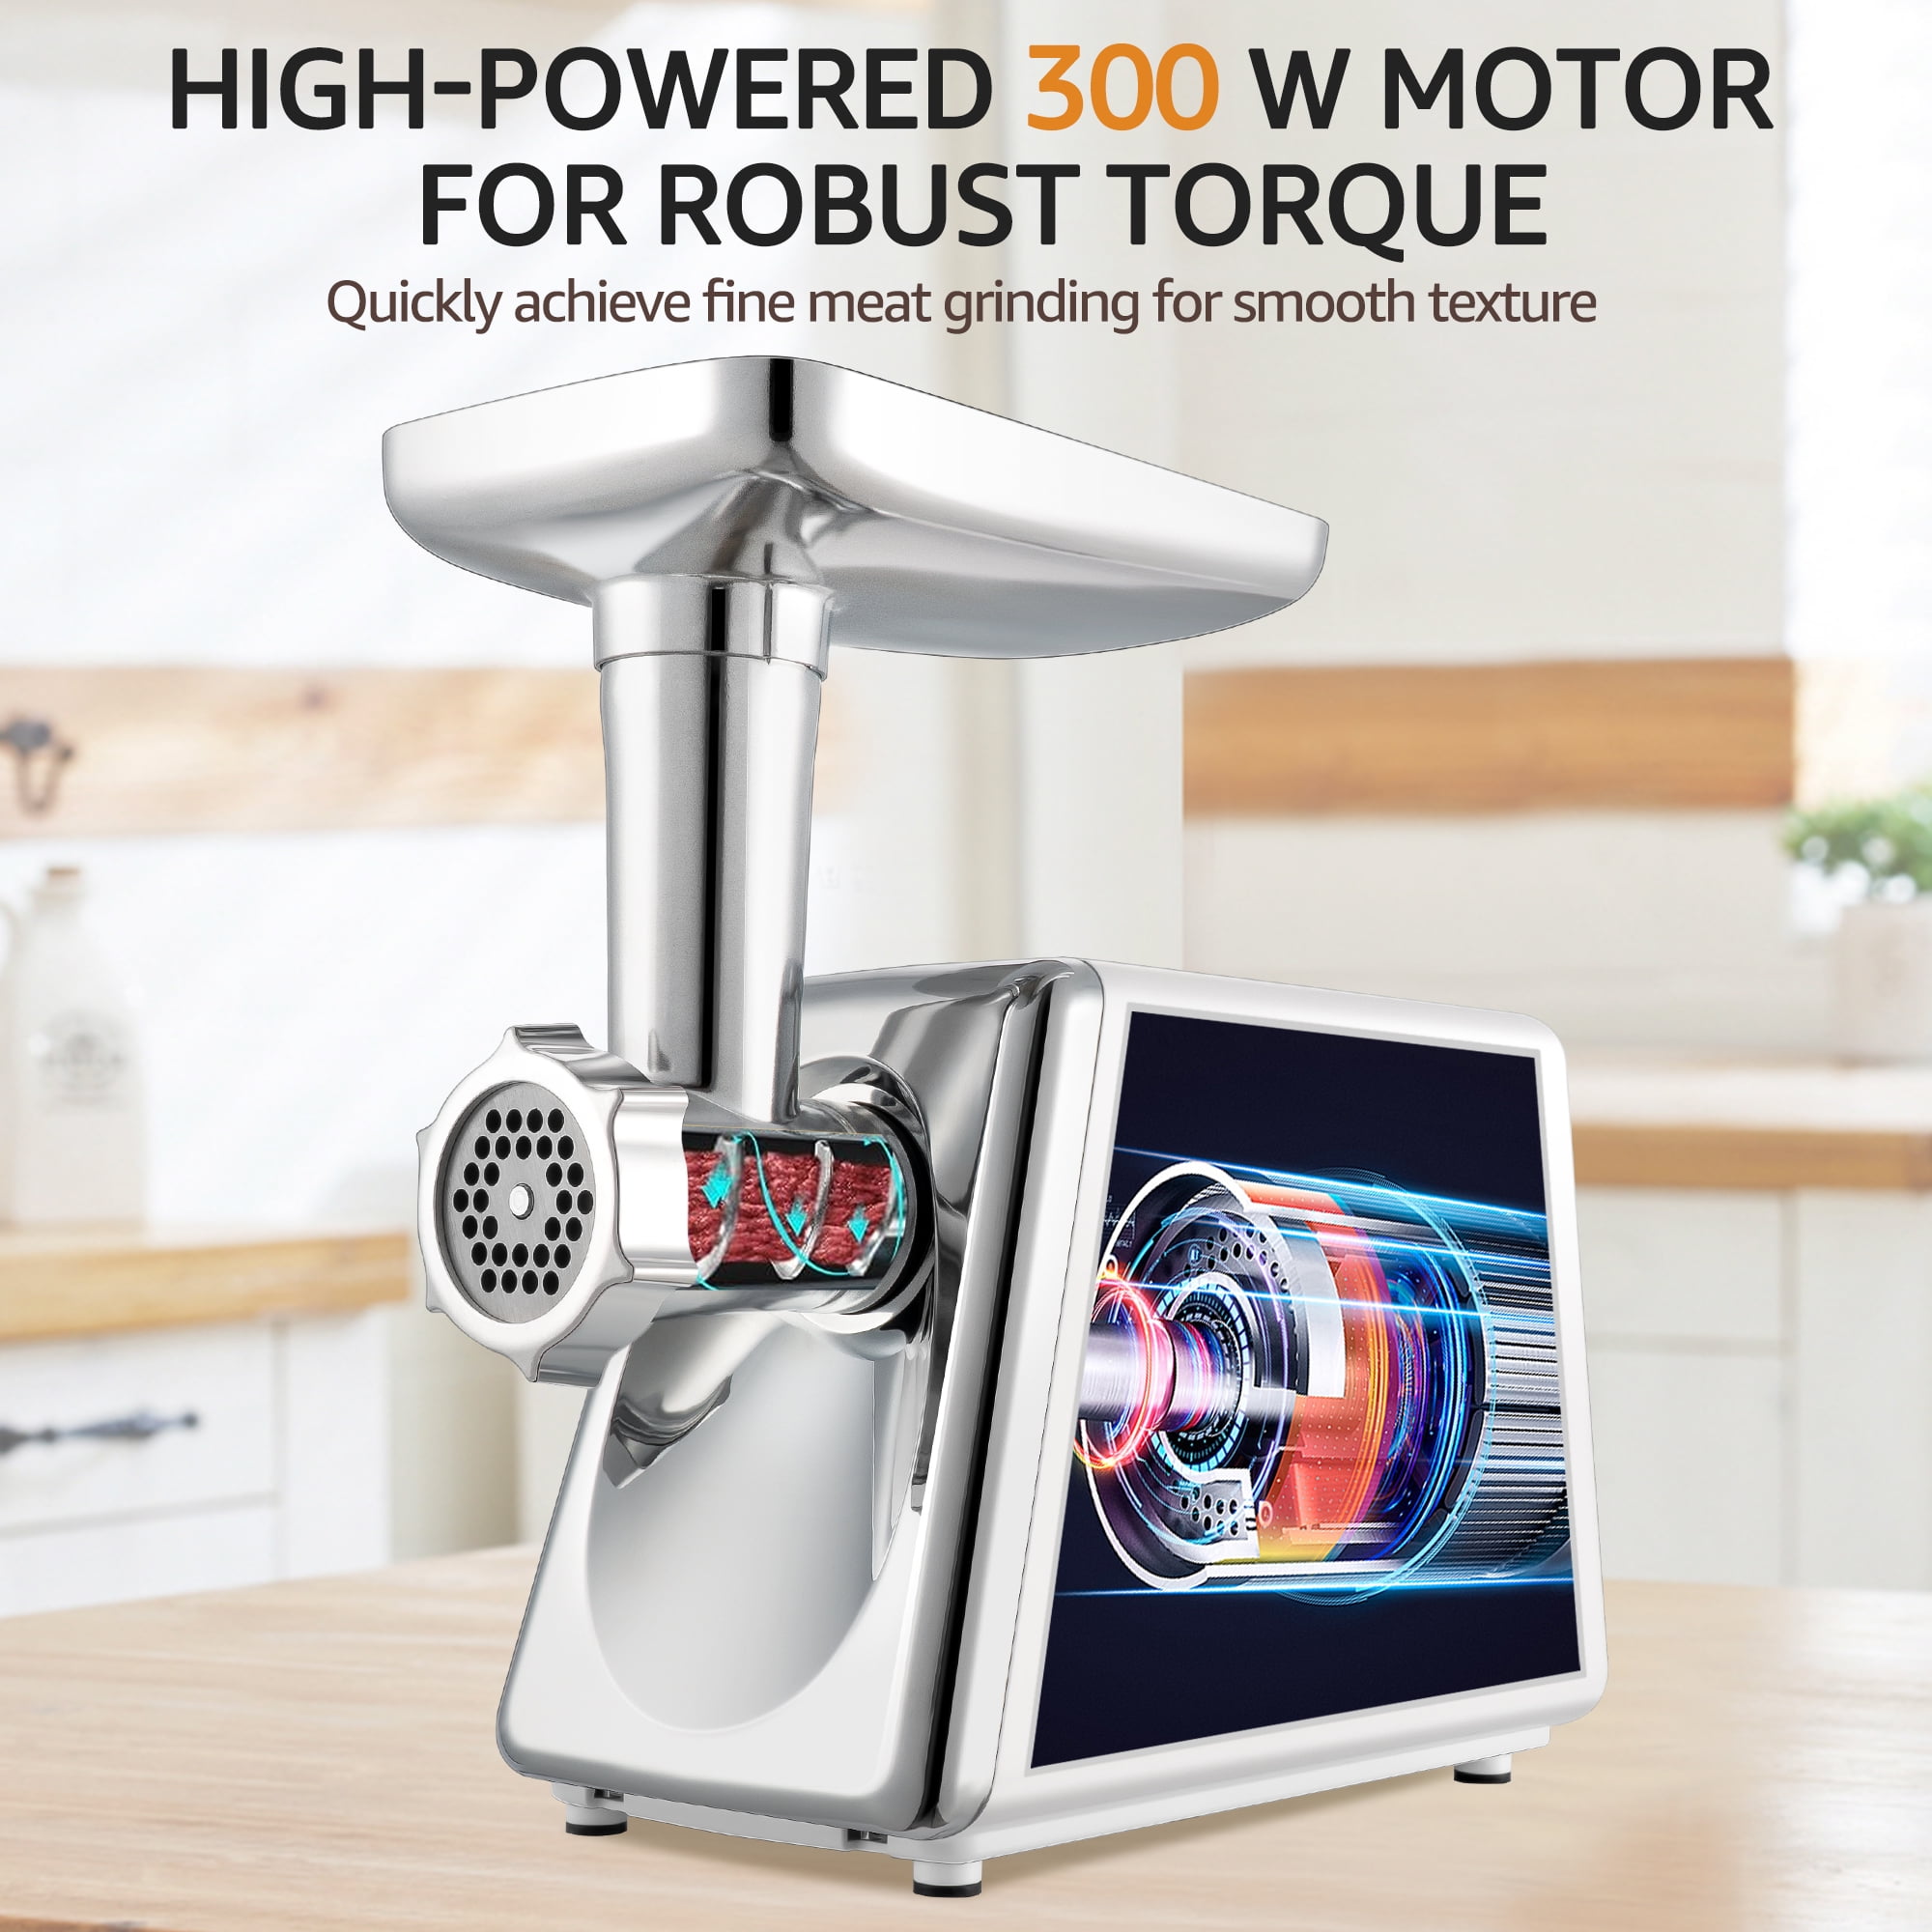 Electric Meat Grinder, Heavy Duty Meat Mincer, Food Grinder with Sausage  and Kubbe Kit, 3-Grinder Plates, White DHS0RA22091301 - The Home Depot